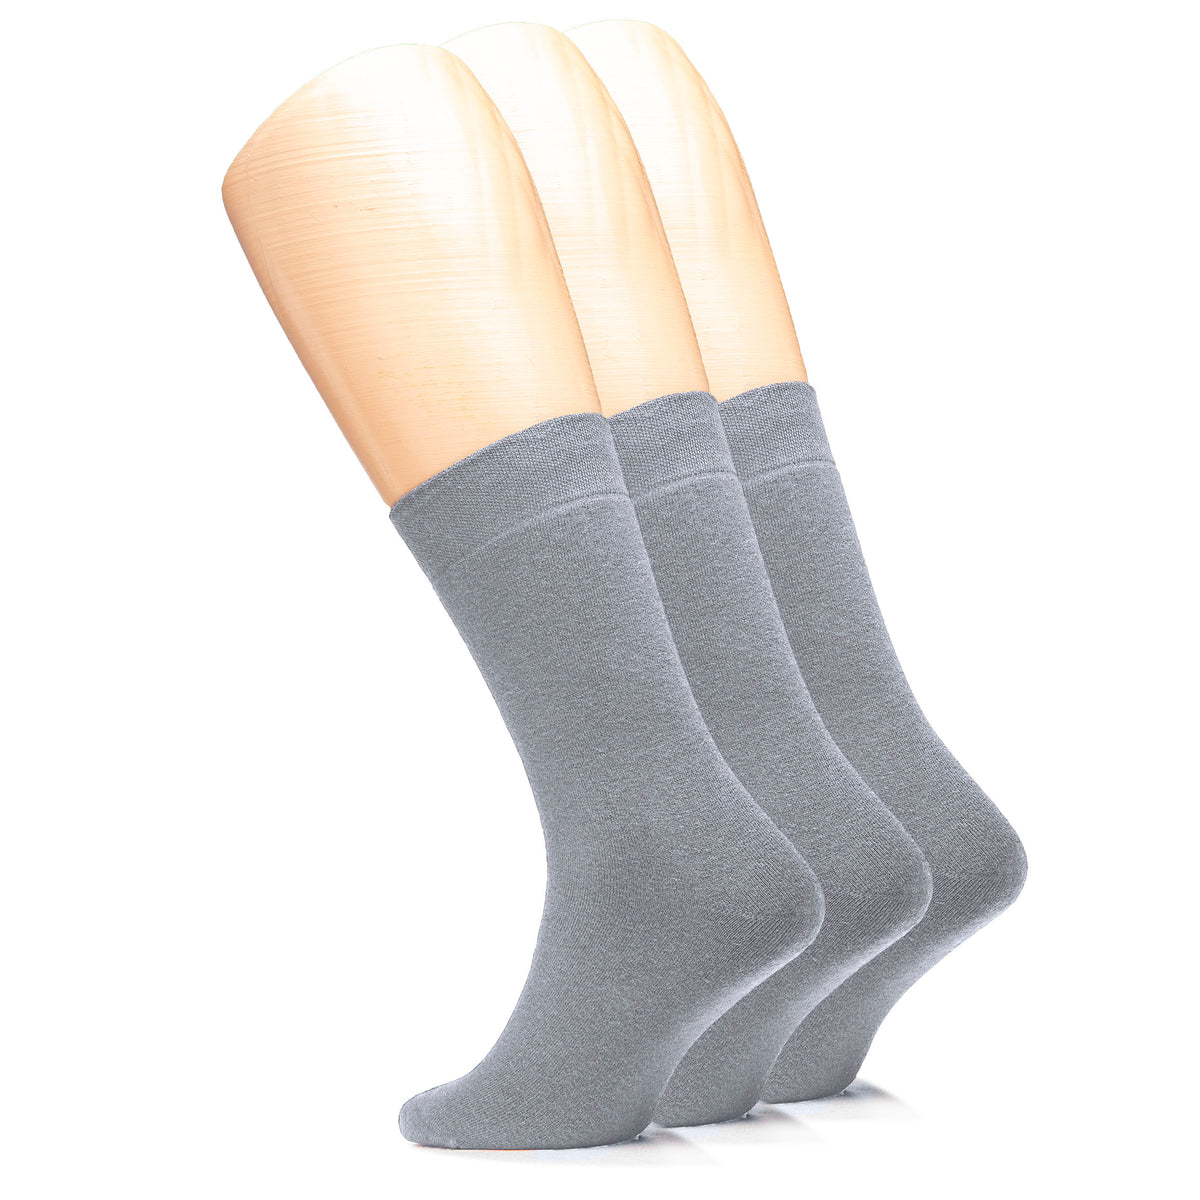 This mannequin displays three pairs of Men's Cotton Full Cushion Ankle Socks in grey, perfect for any occasion.